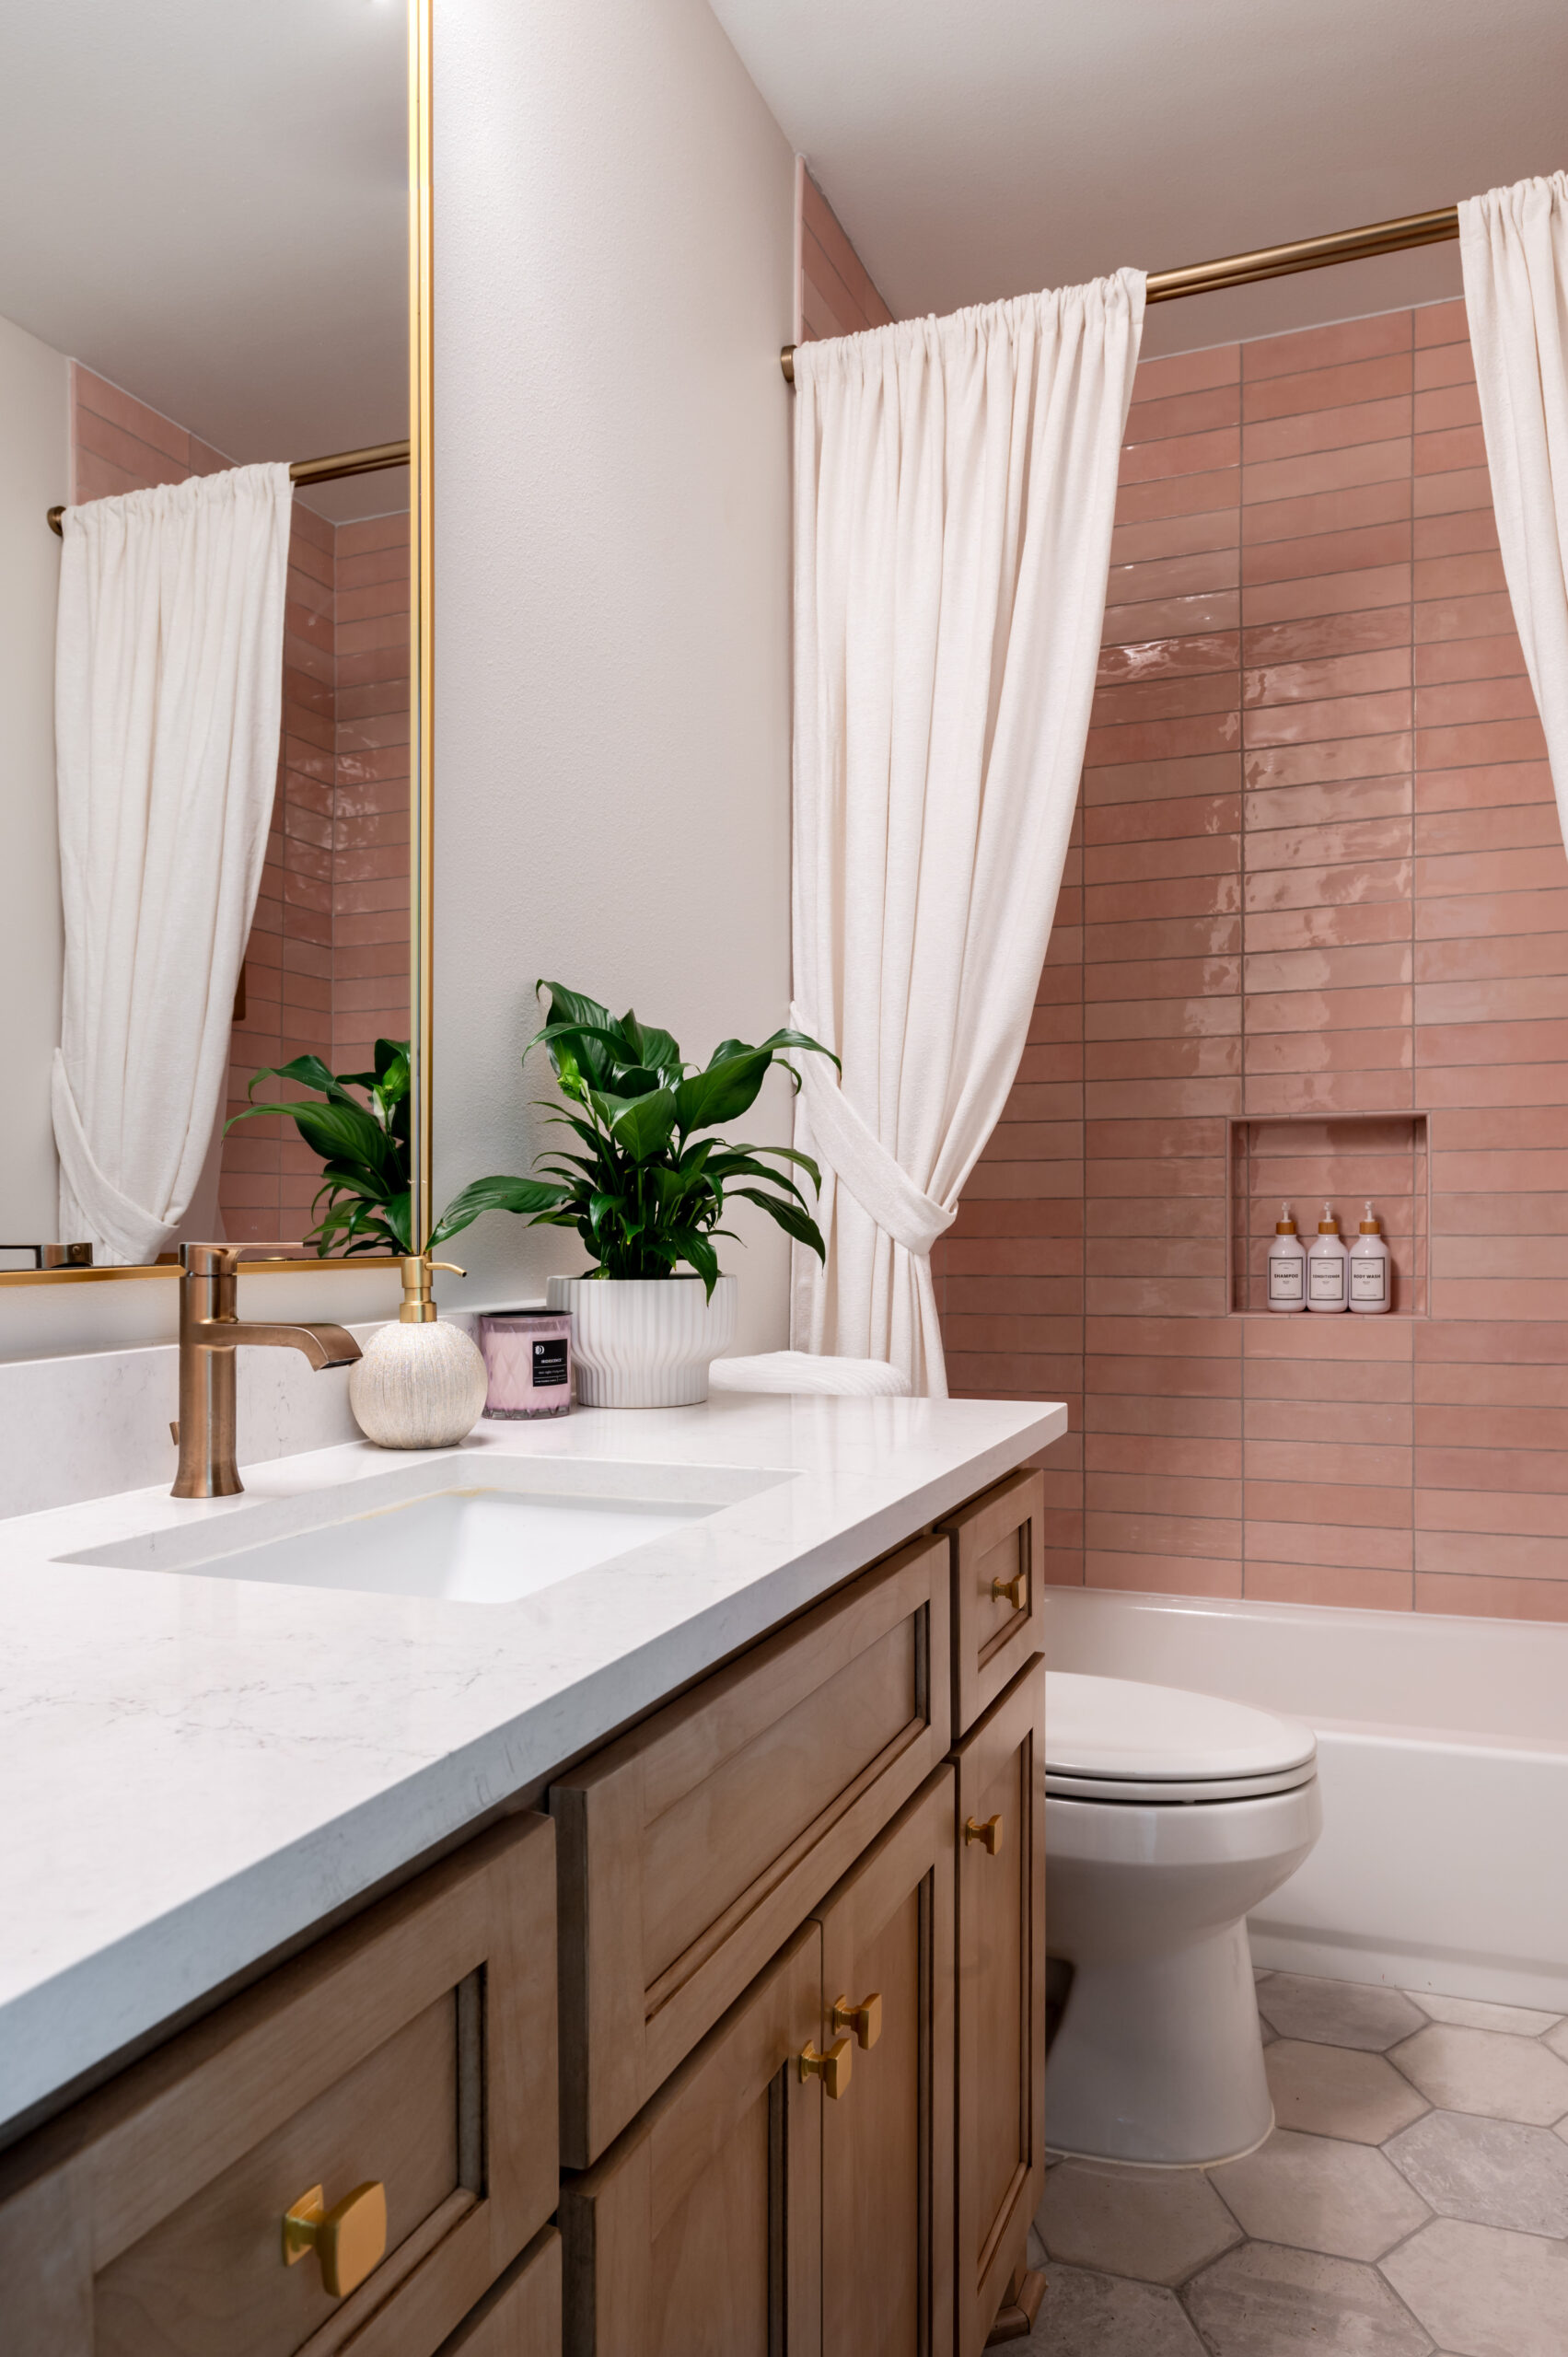 Bathroom interior with marble counters and pink shower backsplash